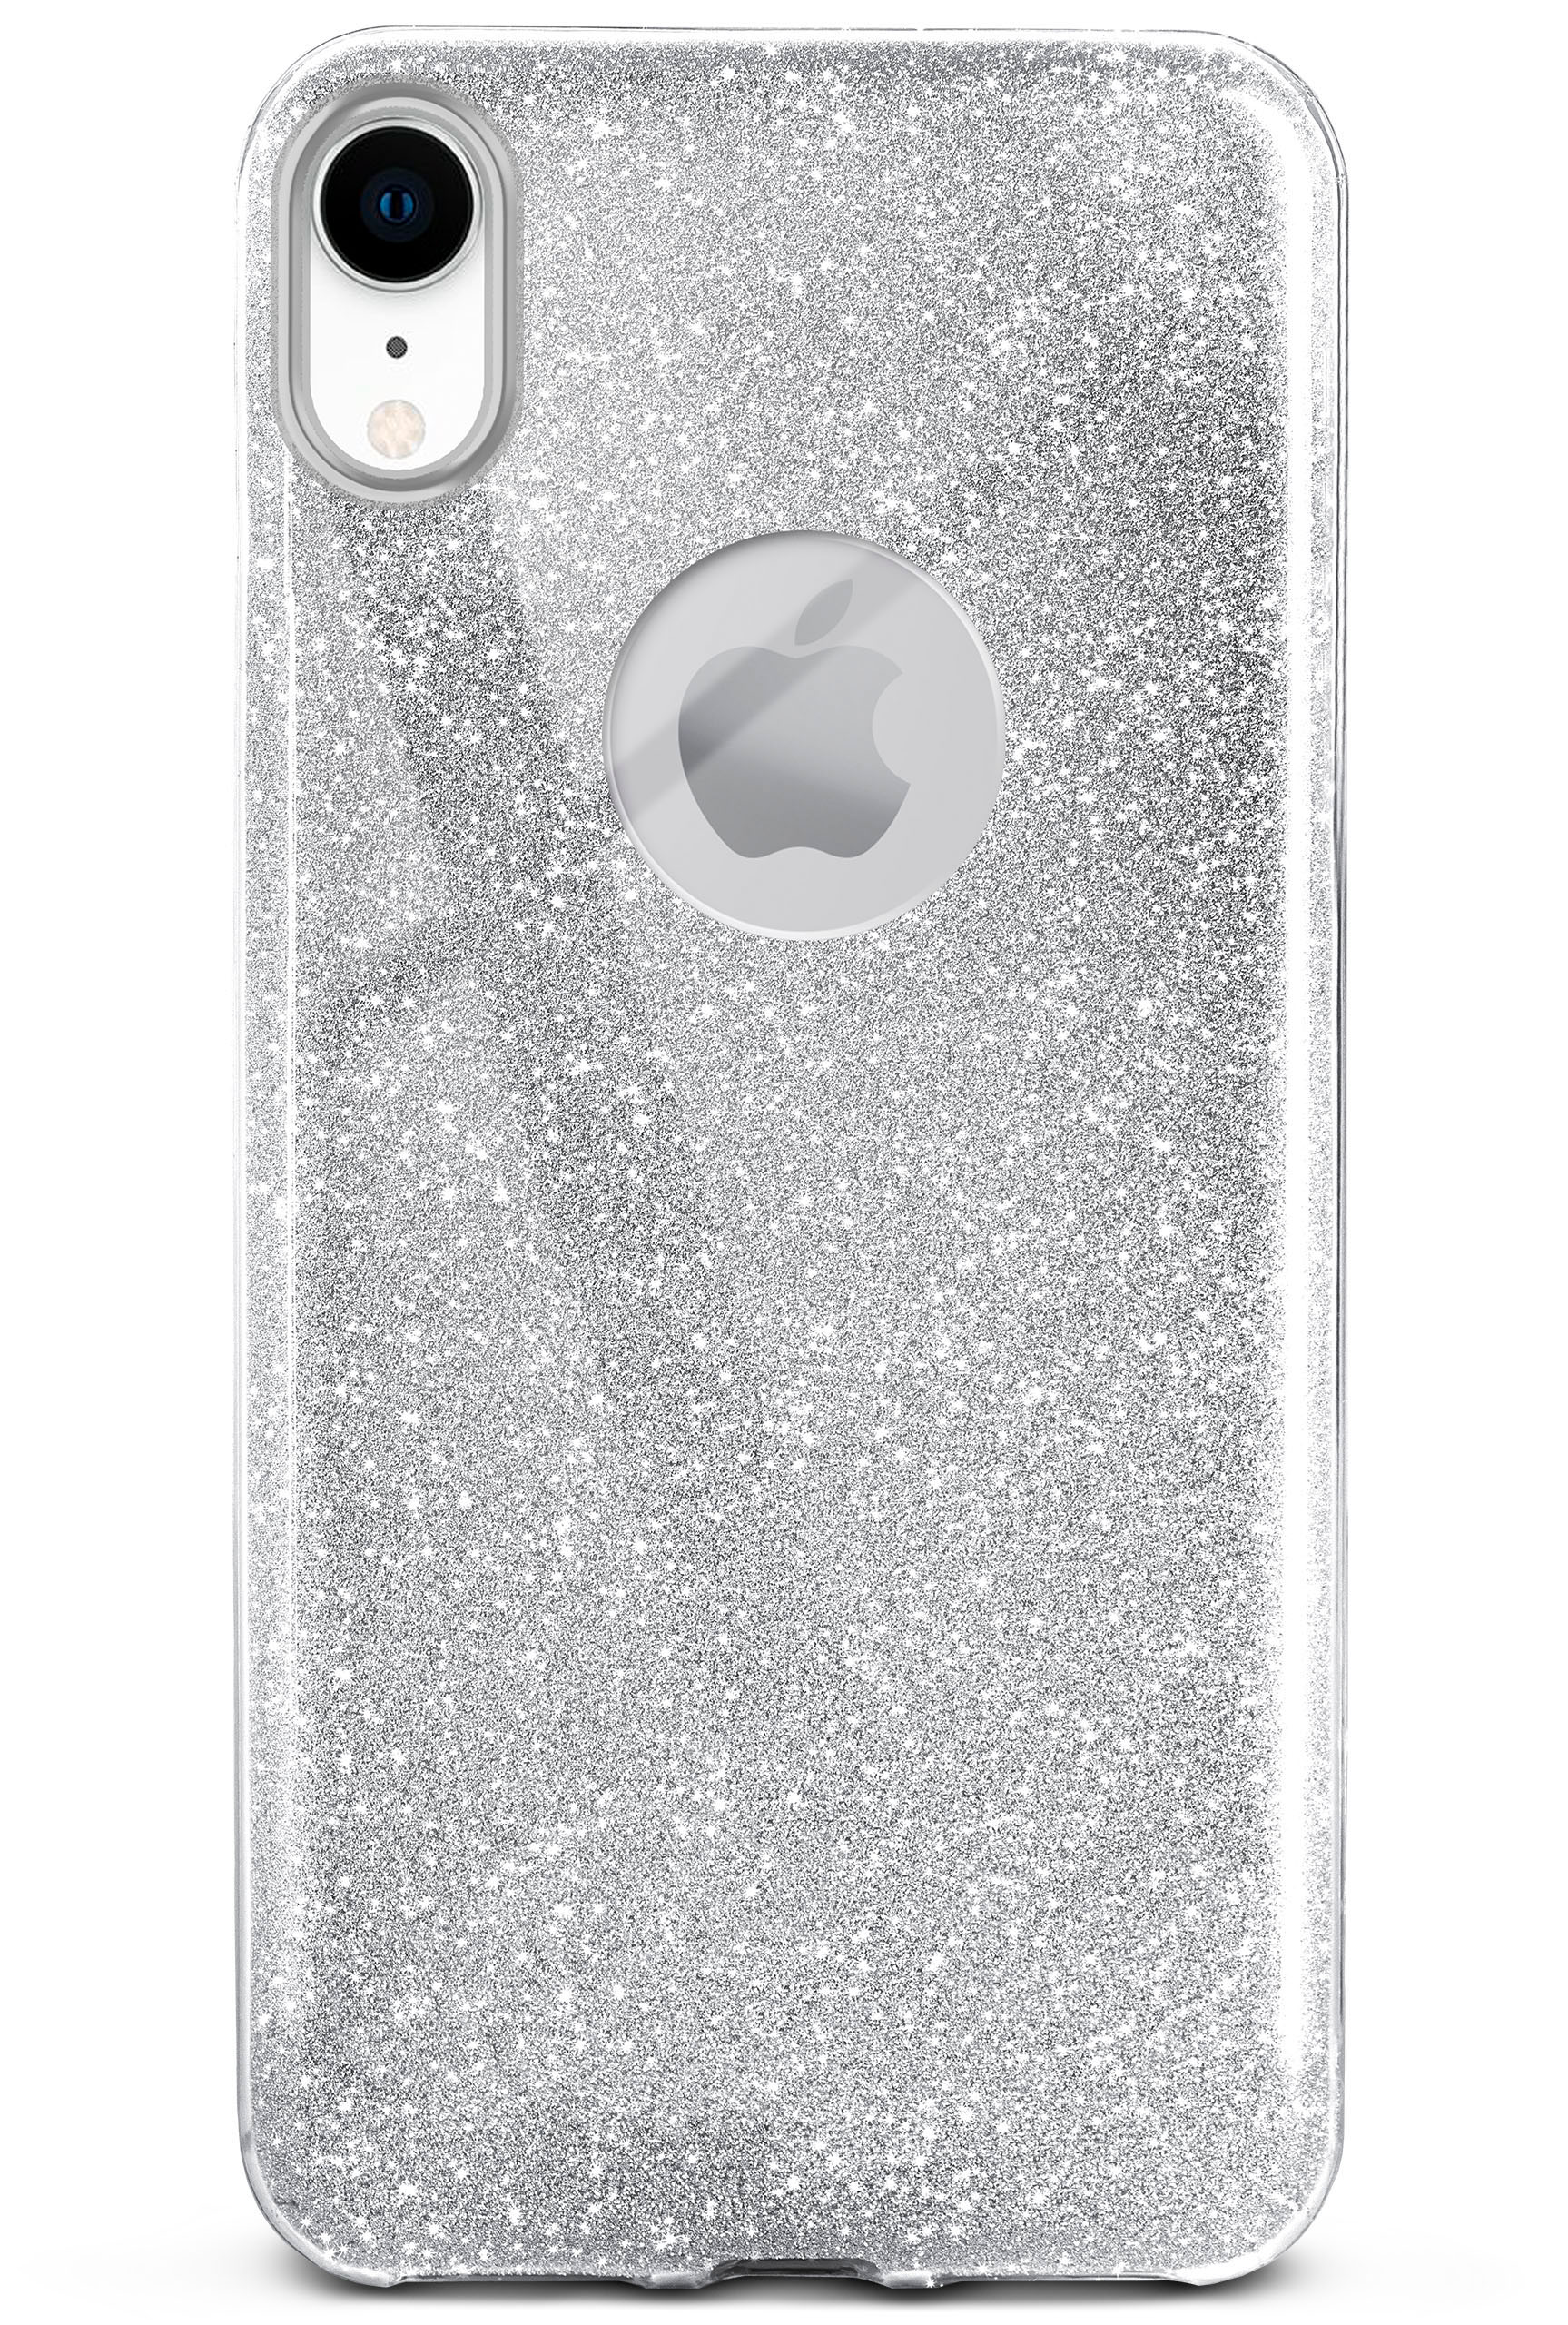 Case, Glitter iPhone ONEFLOW Backcover, Sparkle - XR, Apple, Silver